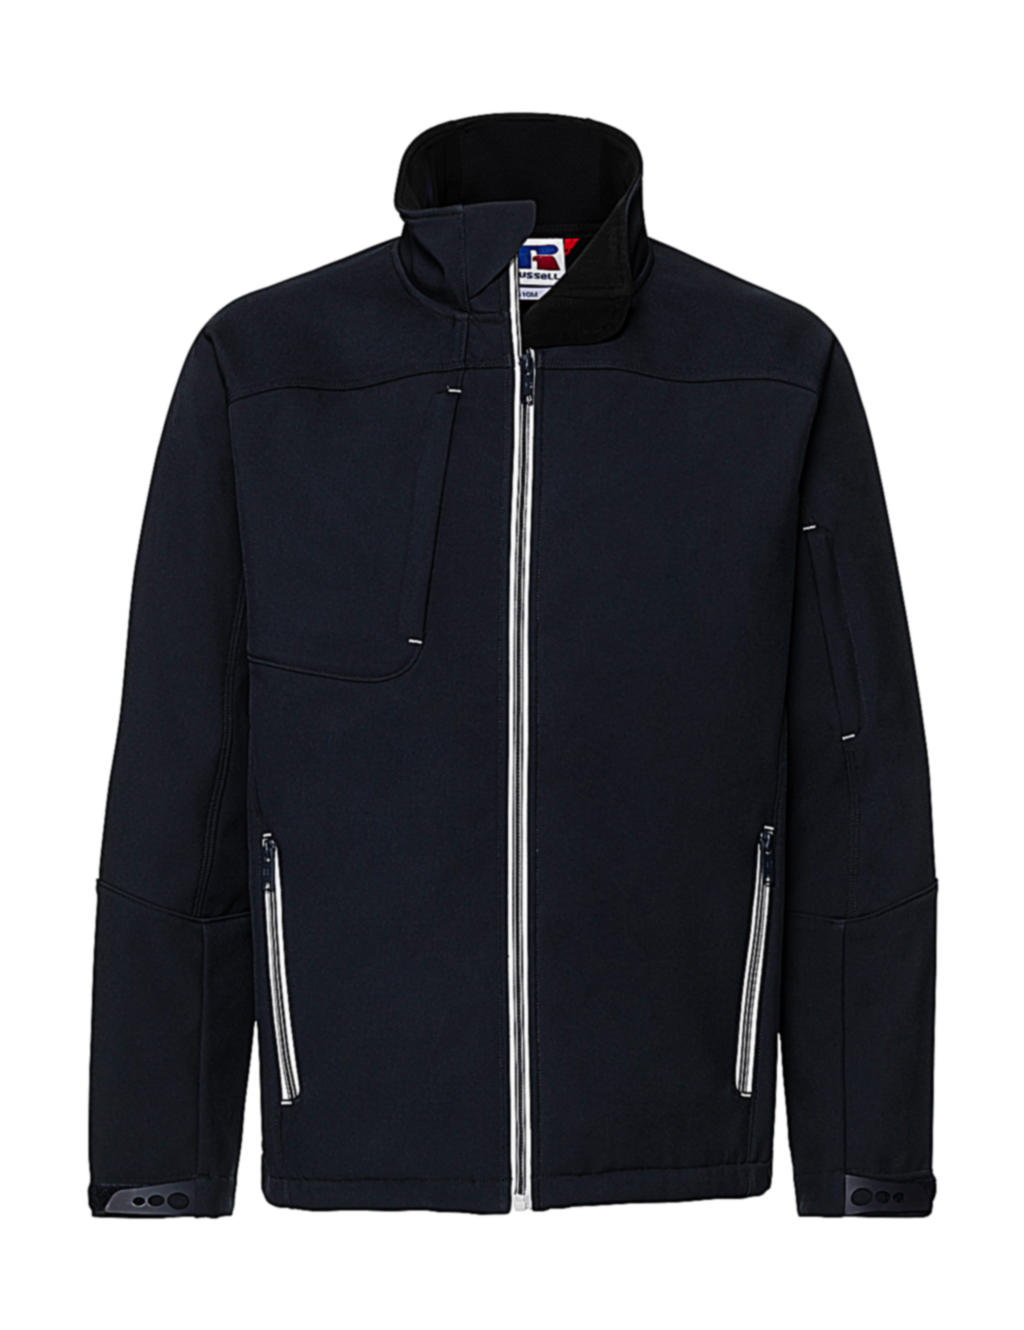  Mens Bionic Softshell Jacket in Farbe French Navy